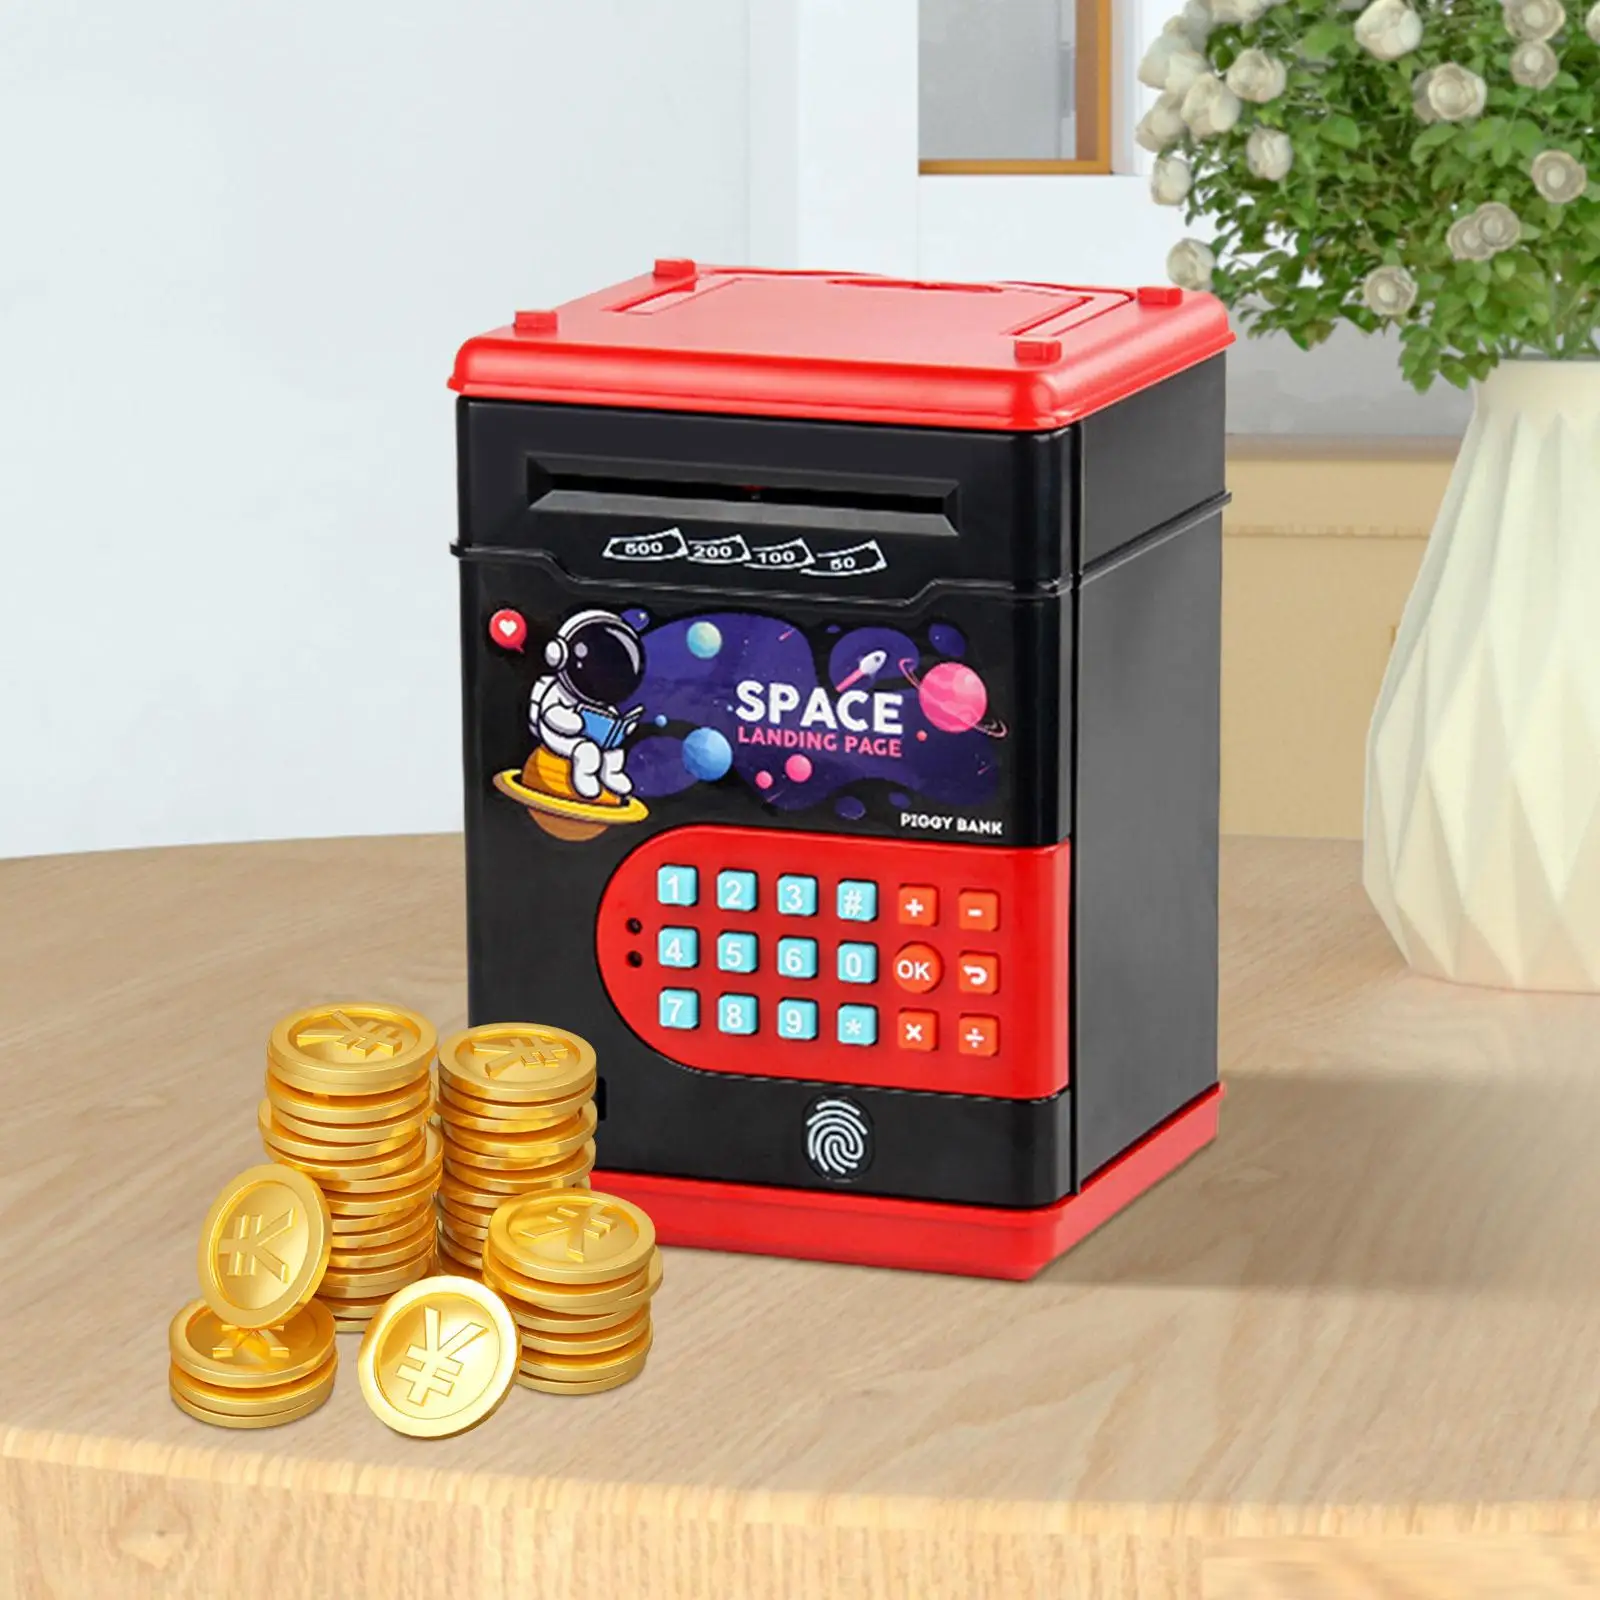 Large Capacity Password ATM Machine Toy Cash Coins Can Electronic Saving Bank for Kids Children Girls Boys Birthday Gifts